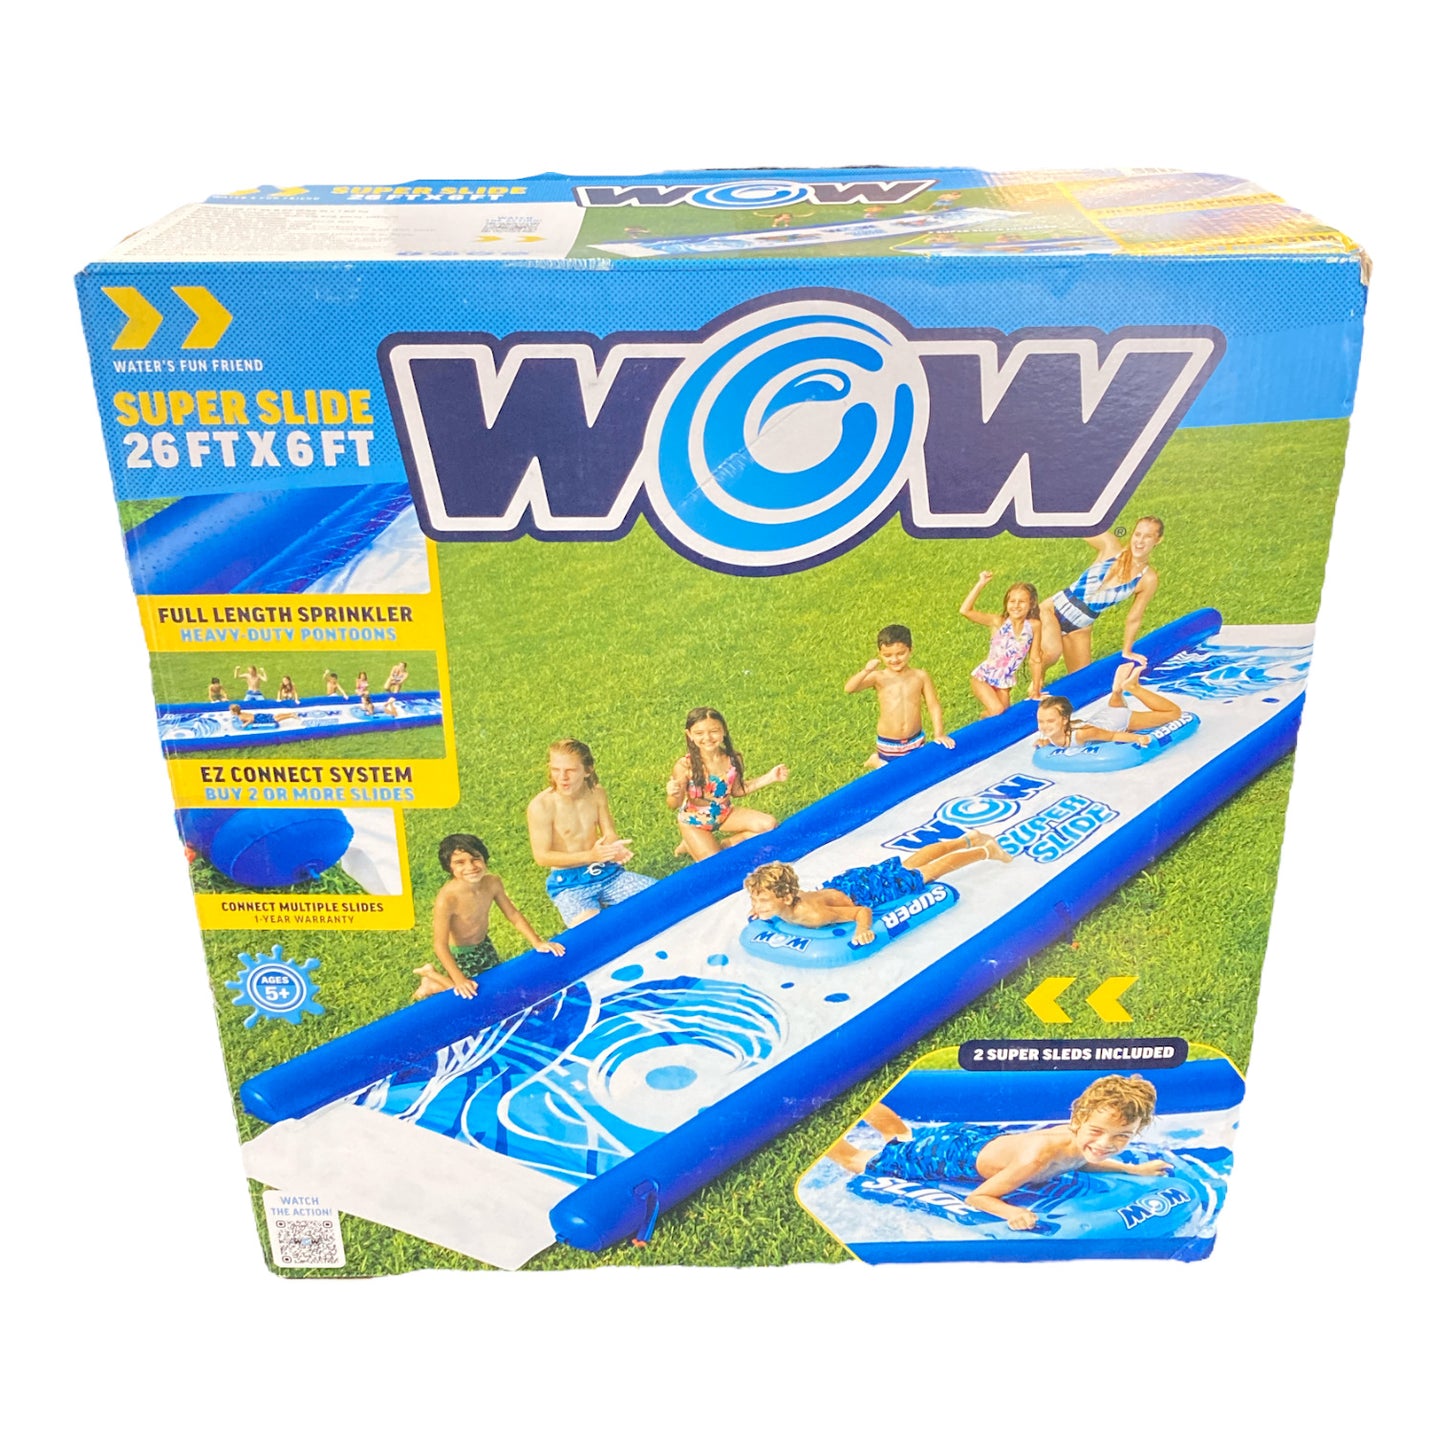 Wow World of Watersports Super Slide, 25' x 6' Water Slide with 2 Sleds